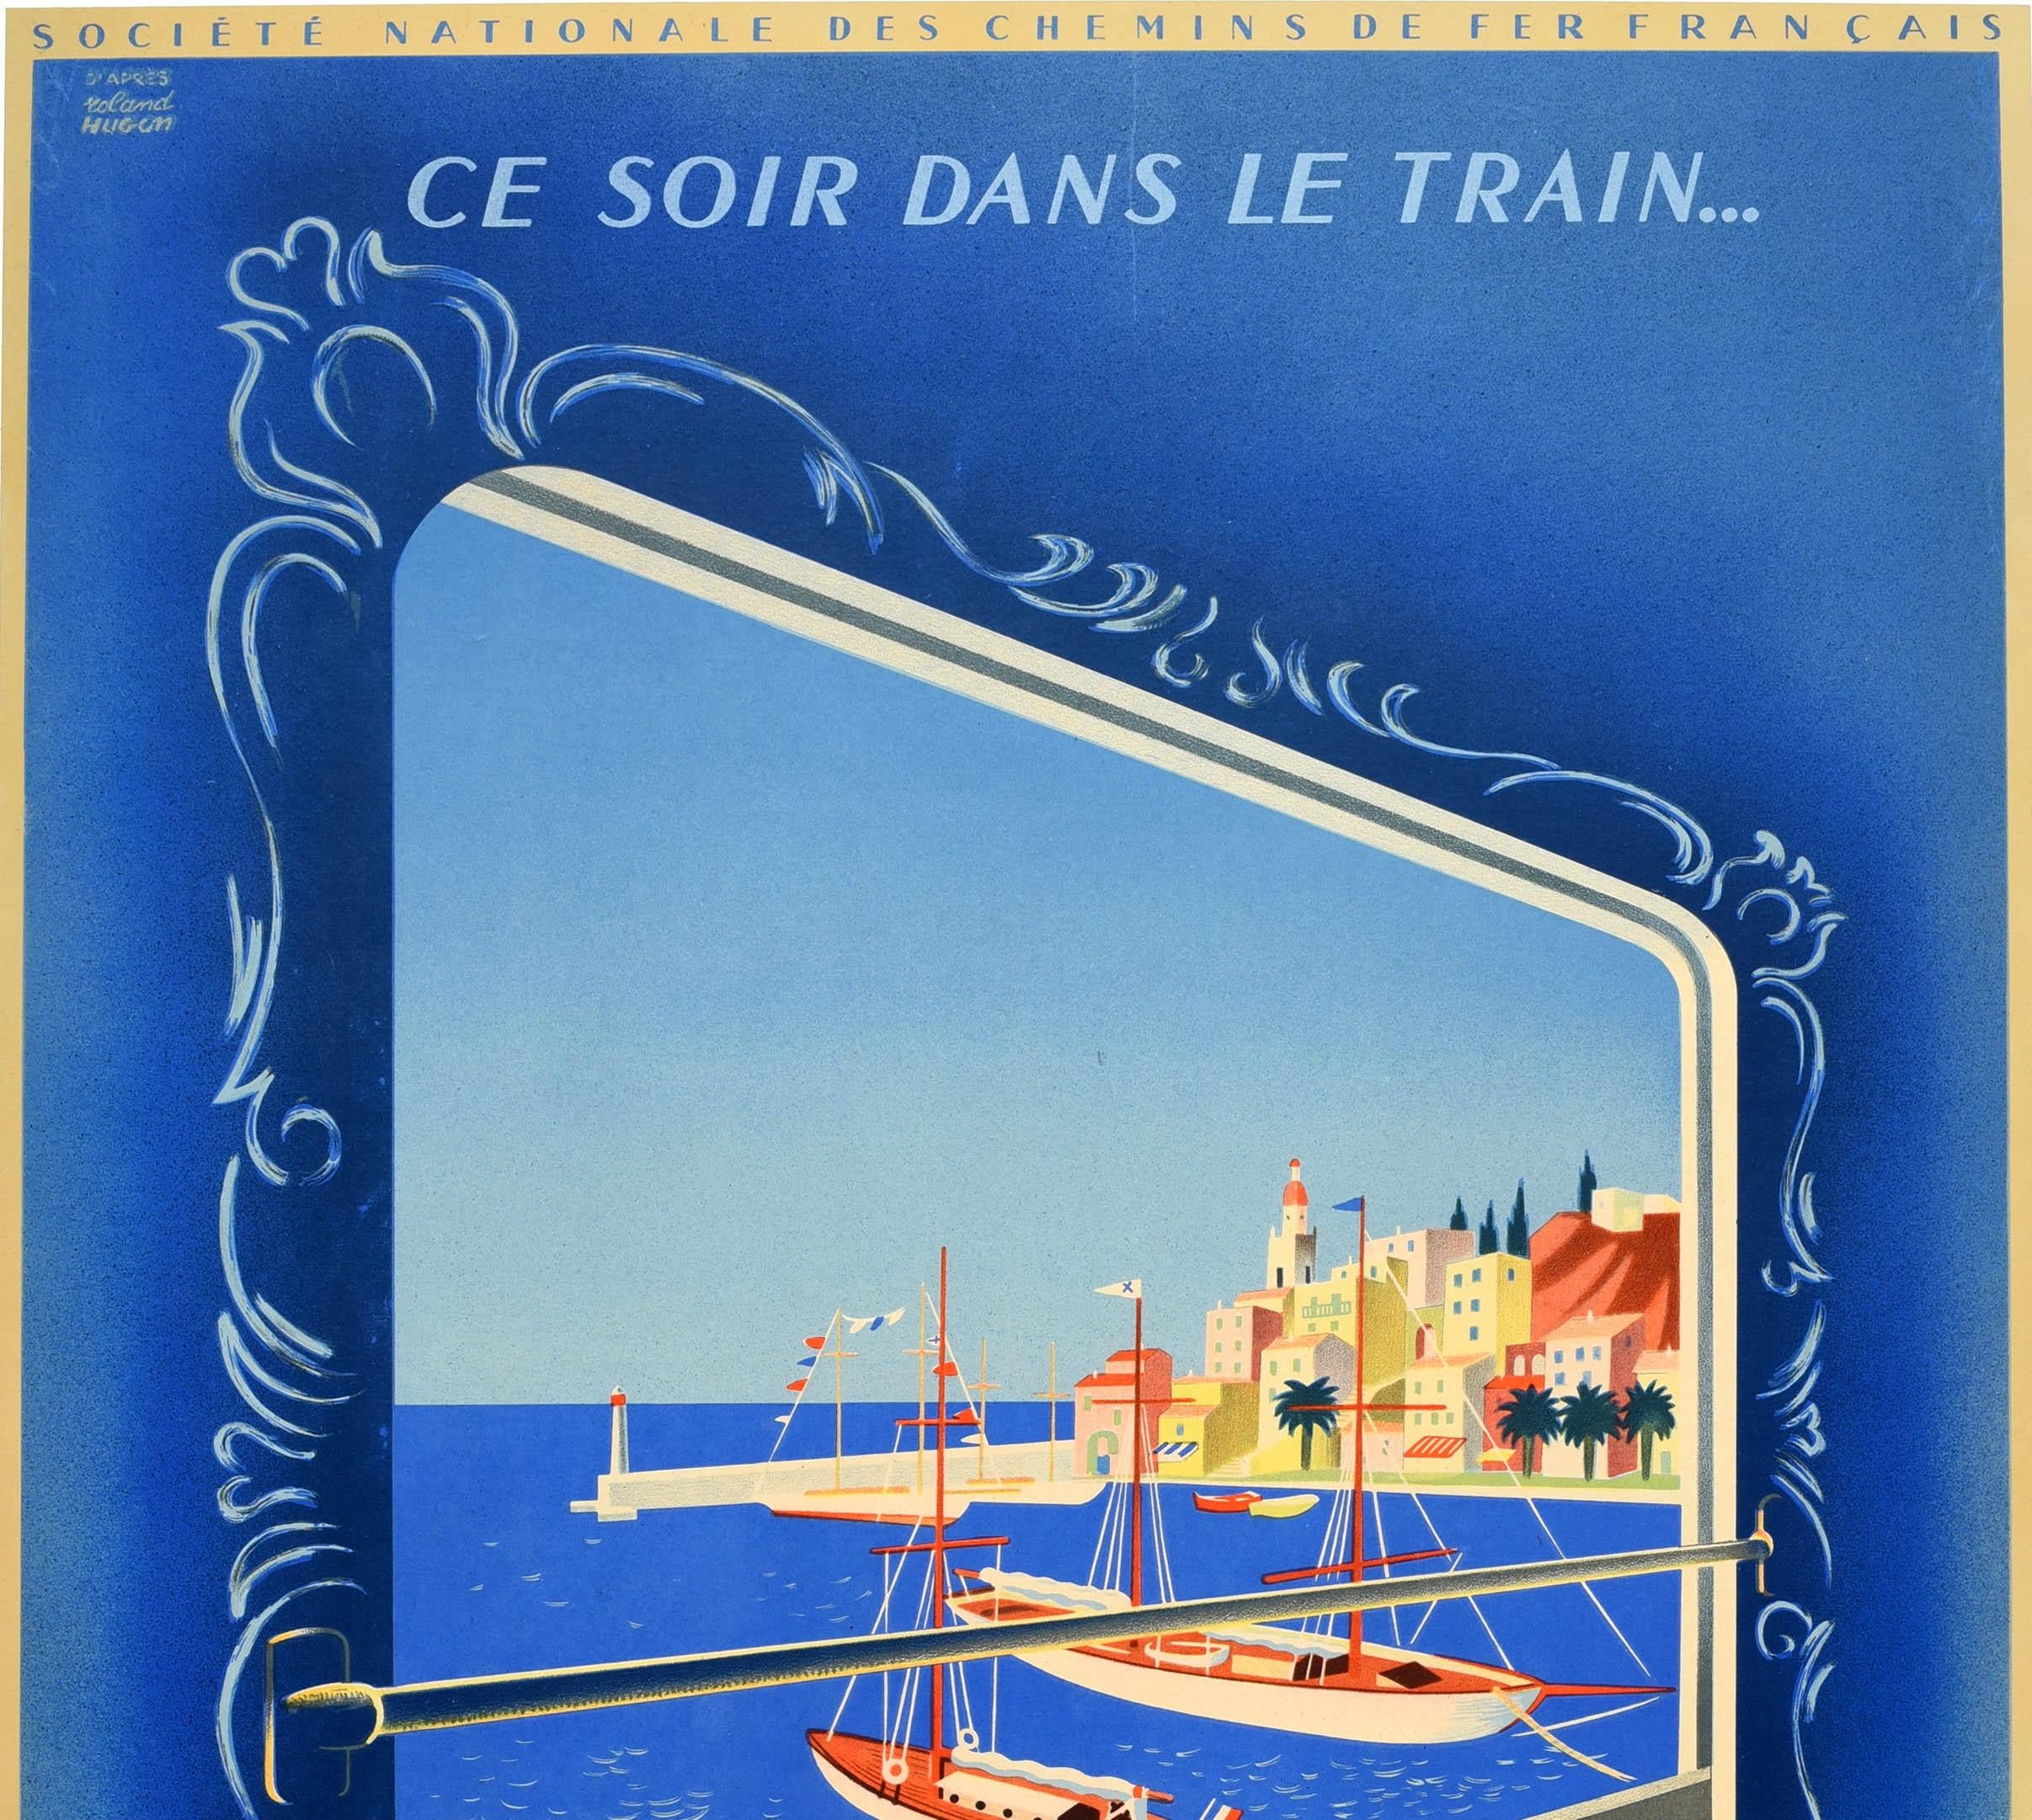 Original vintage travel poster - Ce Soir Dans Le Train... Demain Matin Cote D'Azur / Tonight On The Train... Tomorrow Morning French Riviera - featuring colourful artwork by Roland Hugon (b.1911) of a harbour scene viewed from a framed train window